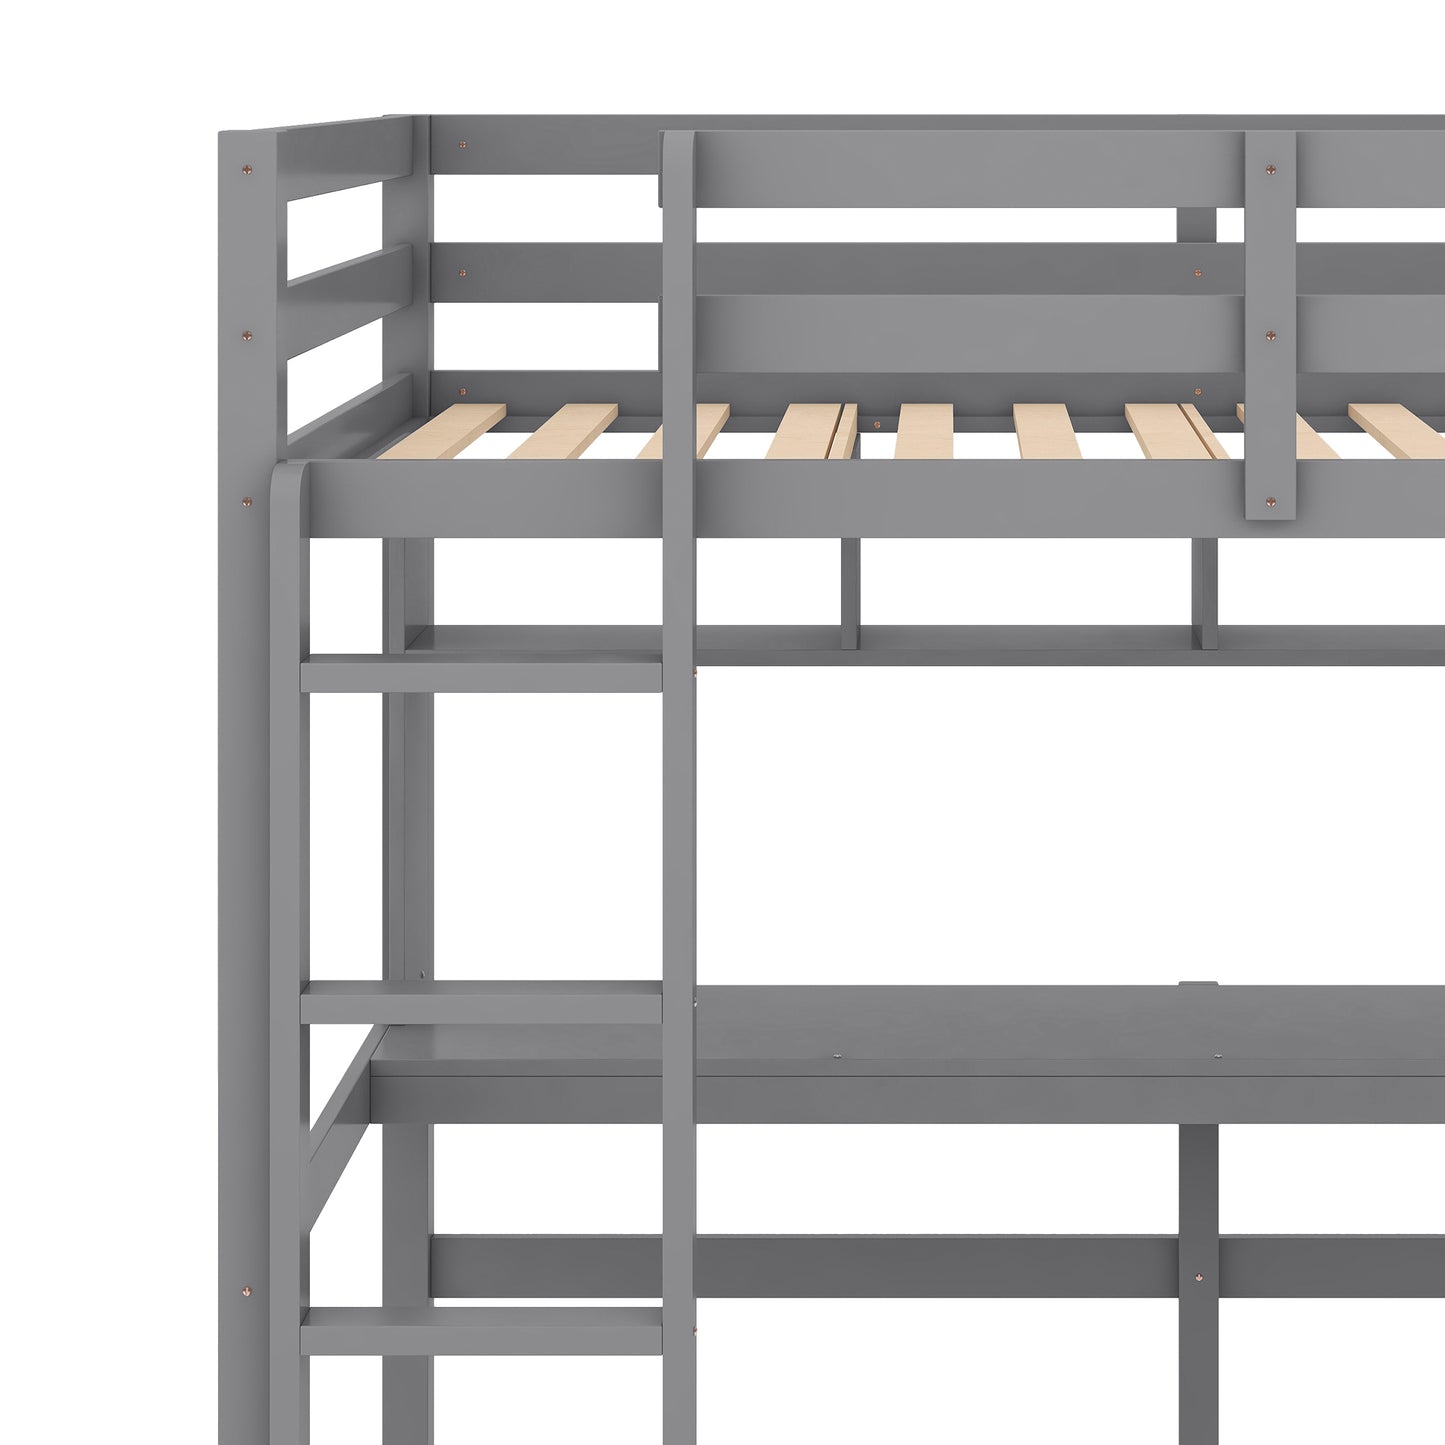 Twin Size Loft Bed with Convenient Desk, Shelves, and Ladder, White(Similar SKU:SM001302AAE)